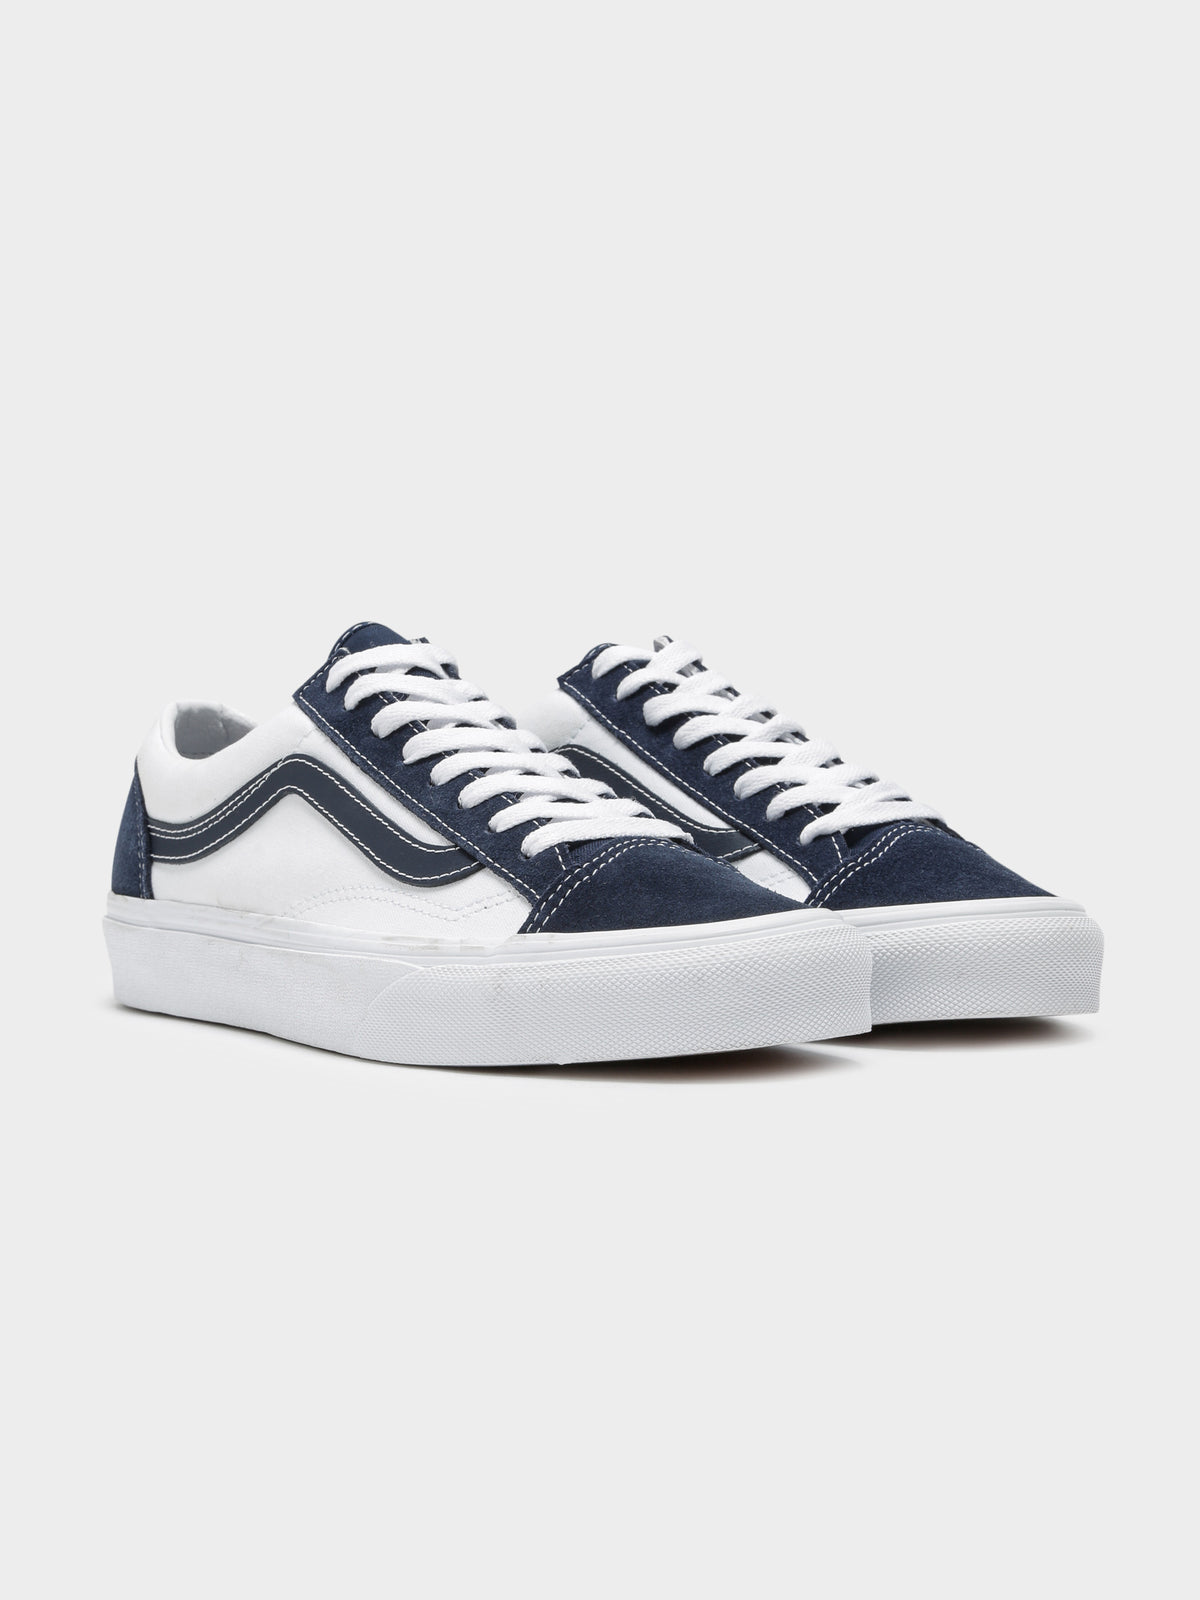 Mens Style 36 Classic Sneakers in Navy &amp; White